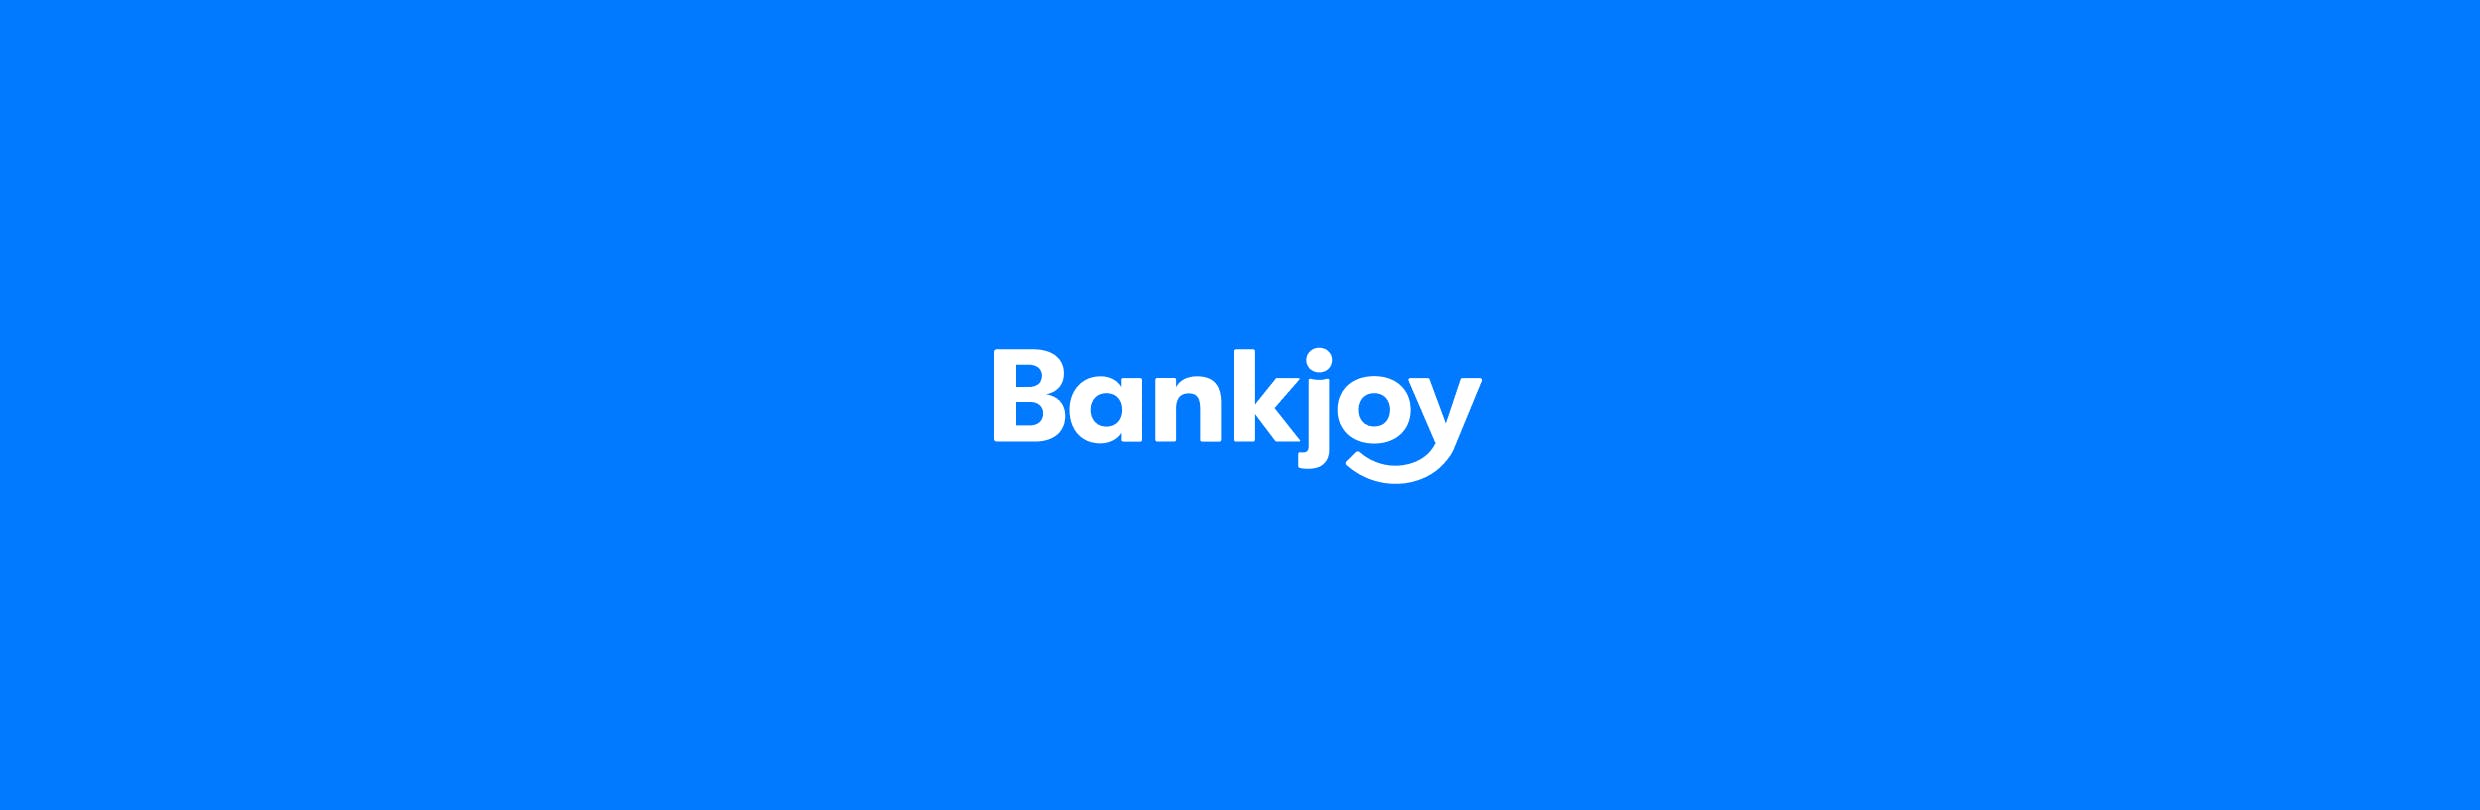 Corelation Conference, AI, and Online Account Opening Bankjoy